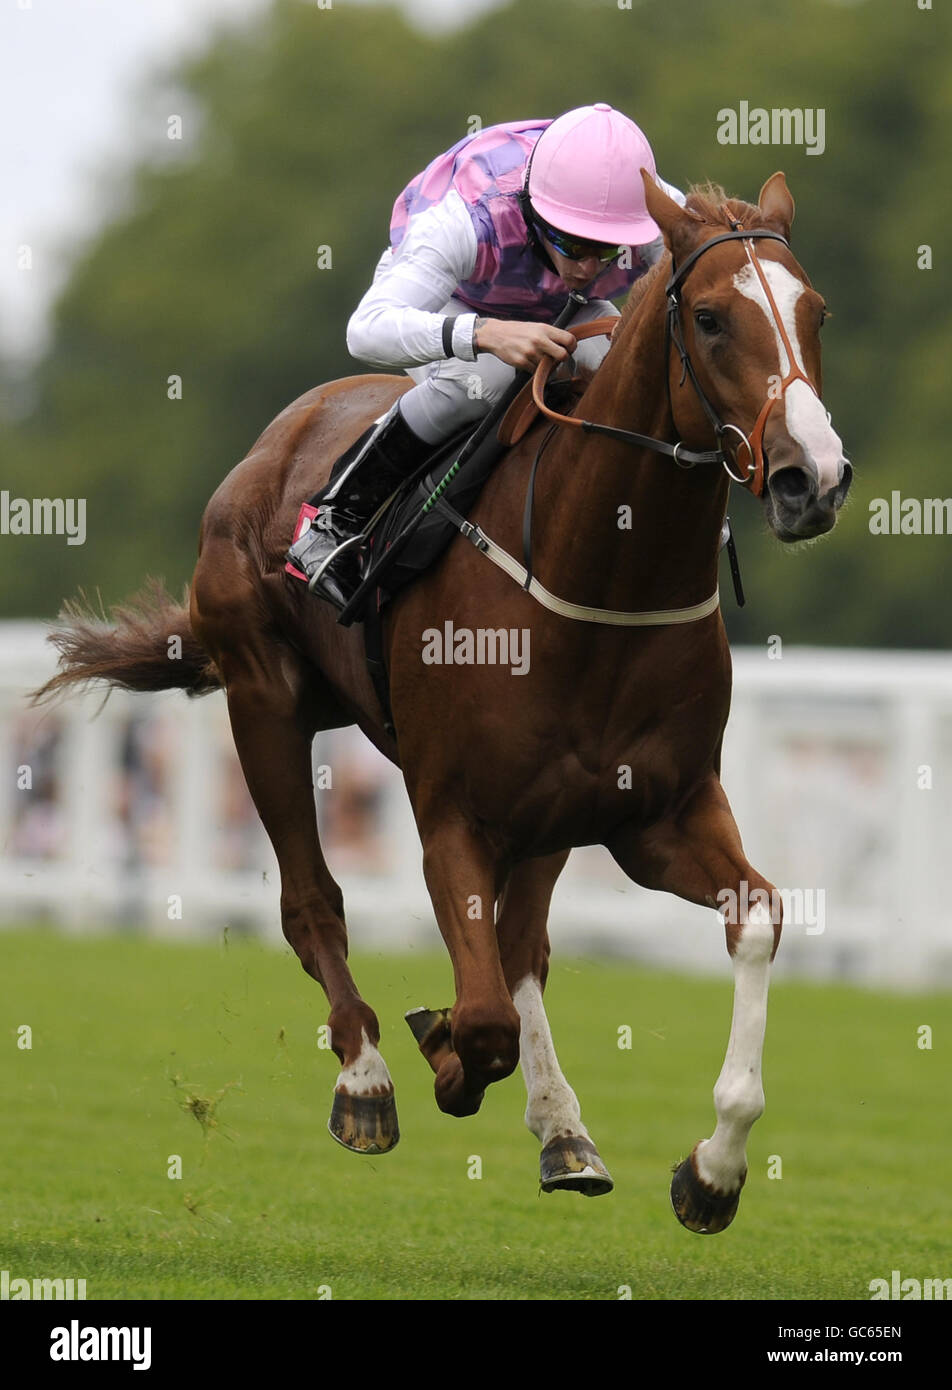 Espiritu ridden by Johnny Murtagh during the Emirates NBD Cup Heritage Handicap at Ascot Racecourse Stock Photo